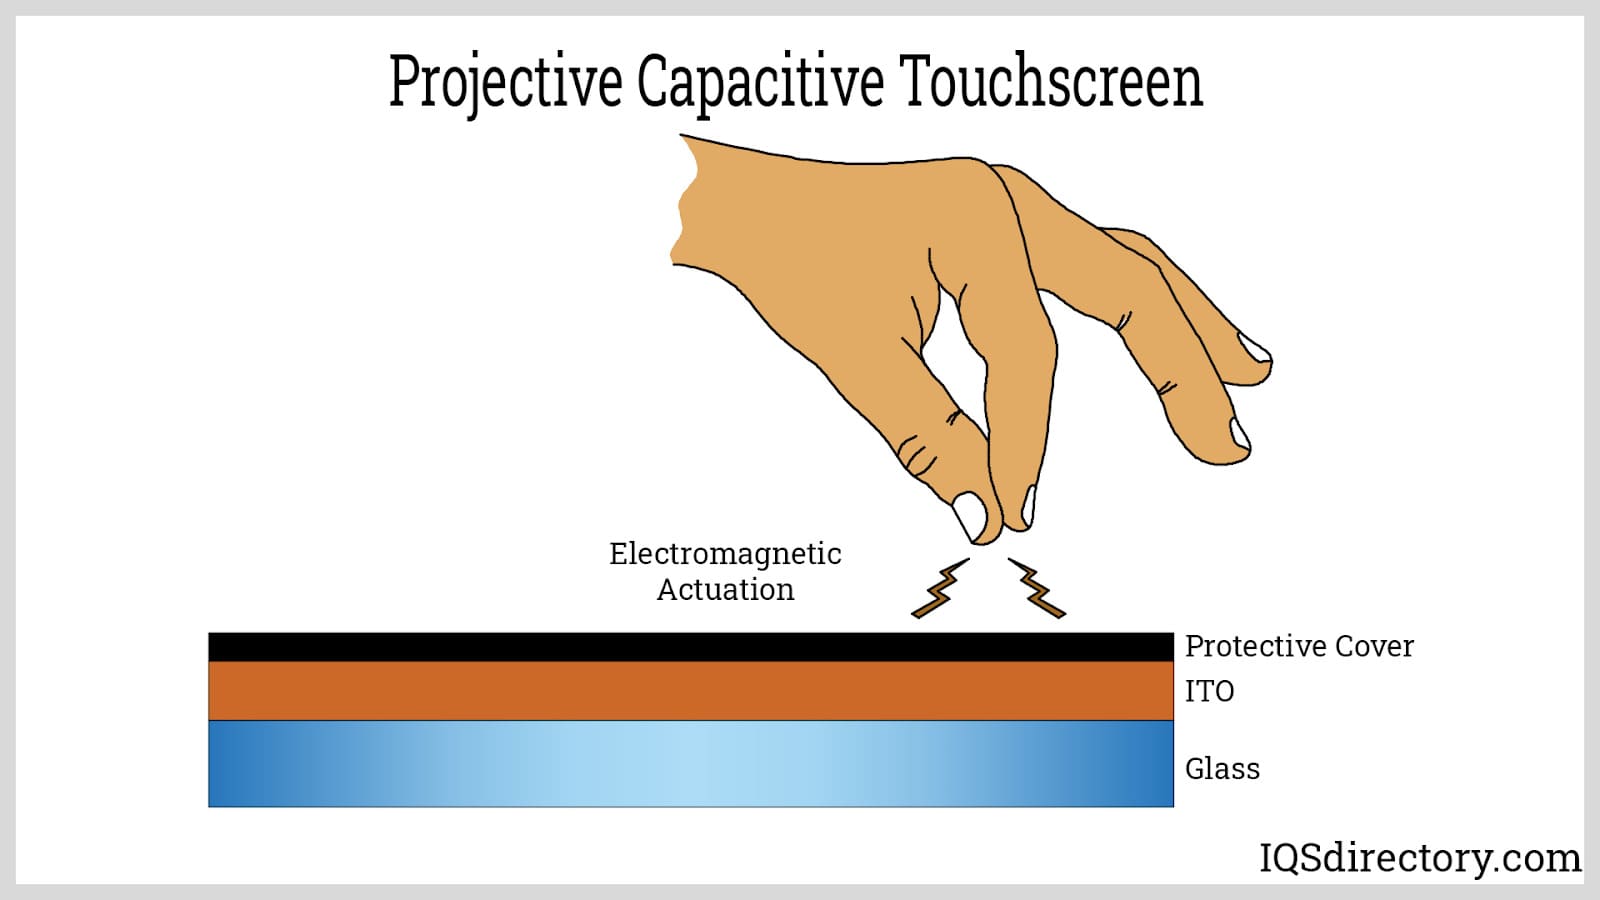 Projective Capacitive Touchscreen